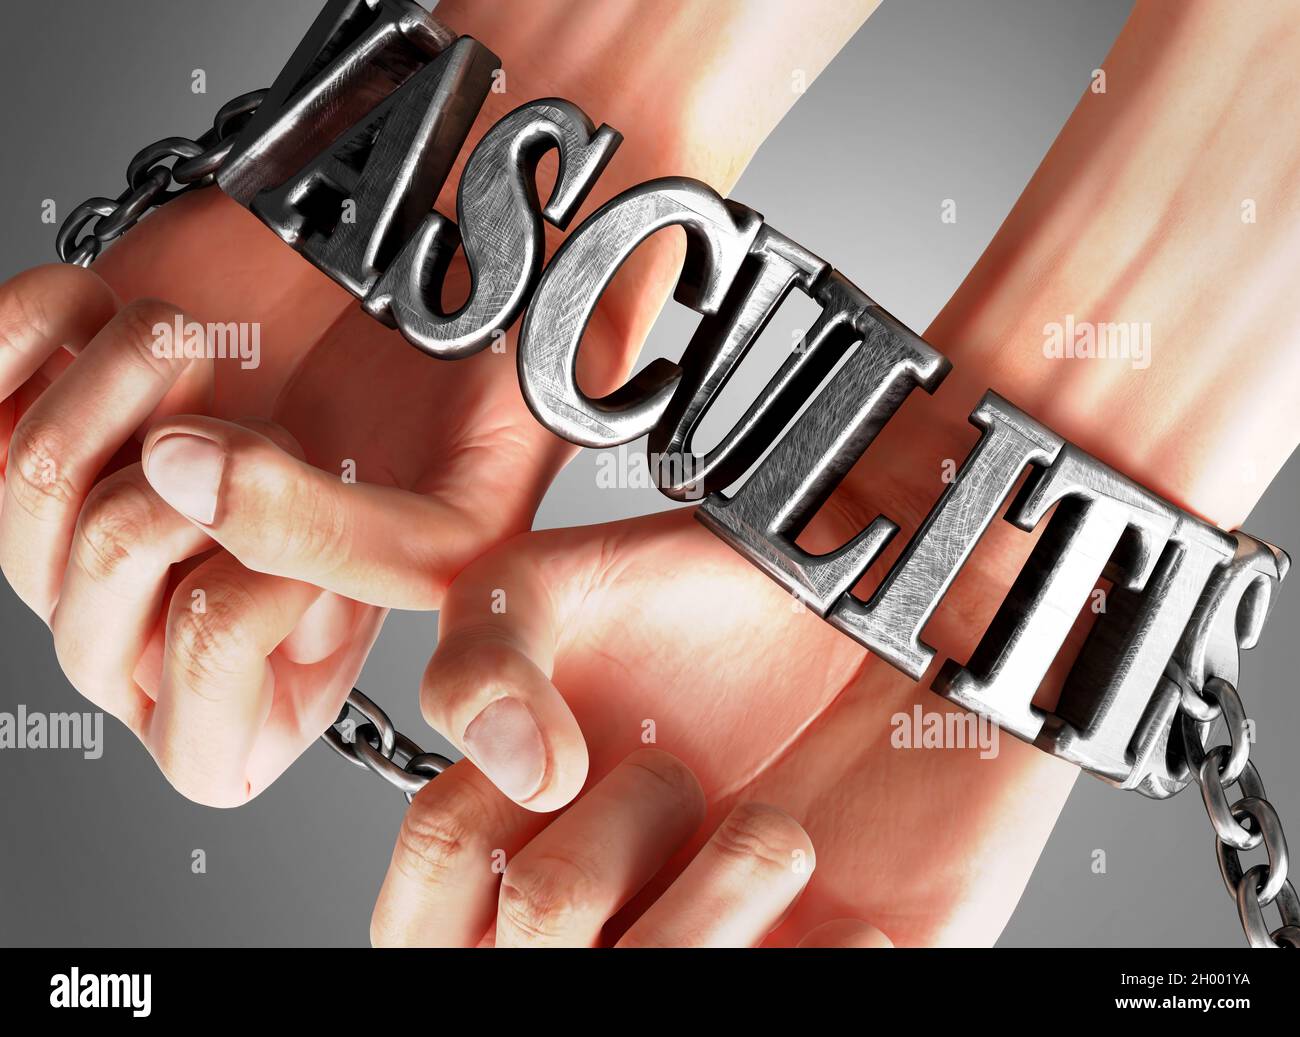 Vasculitis, social impact and its influence - a concept showing a person's hands in chains with a word Vasculitis as a symbol of its burden and misery Stock Photo